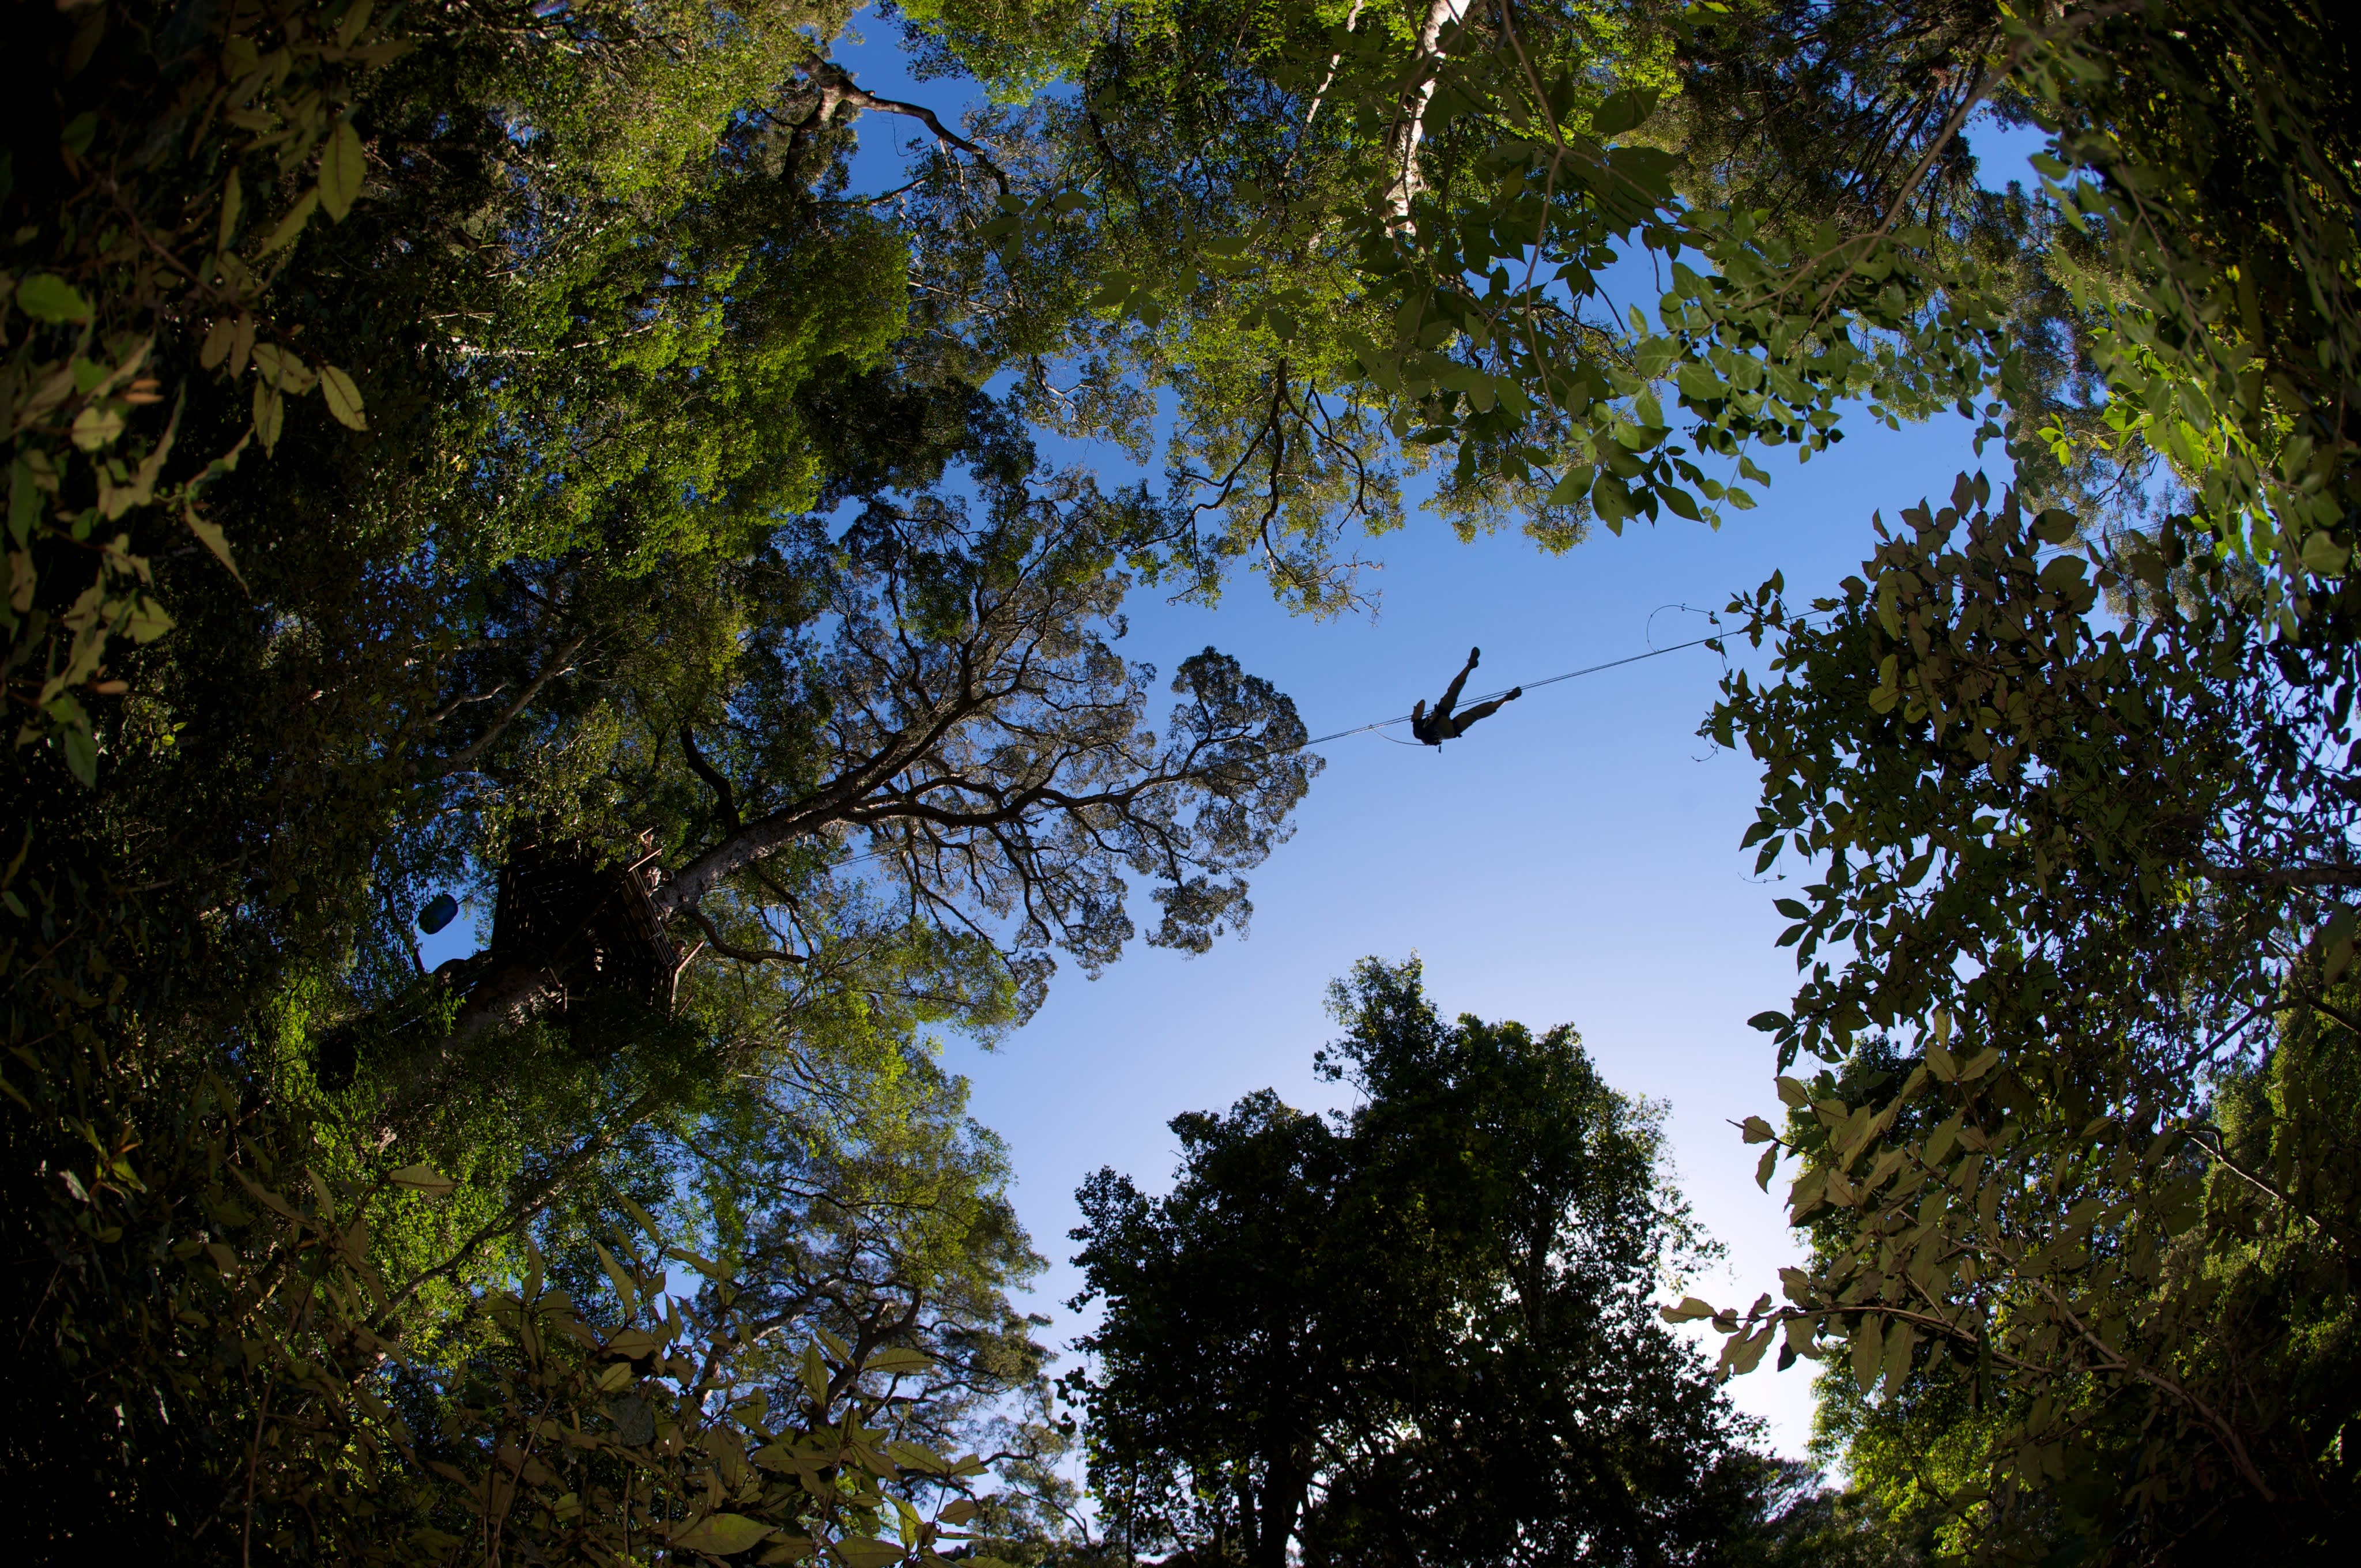 Stormsriver Adventures - Tsitsikamma Canopy Tour: 2.5h Thrilling Zipline Tour for 1 Adult!